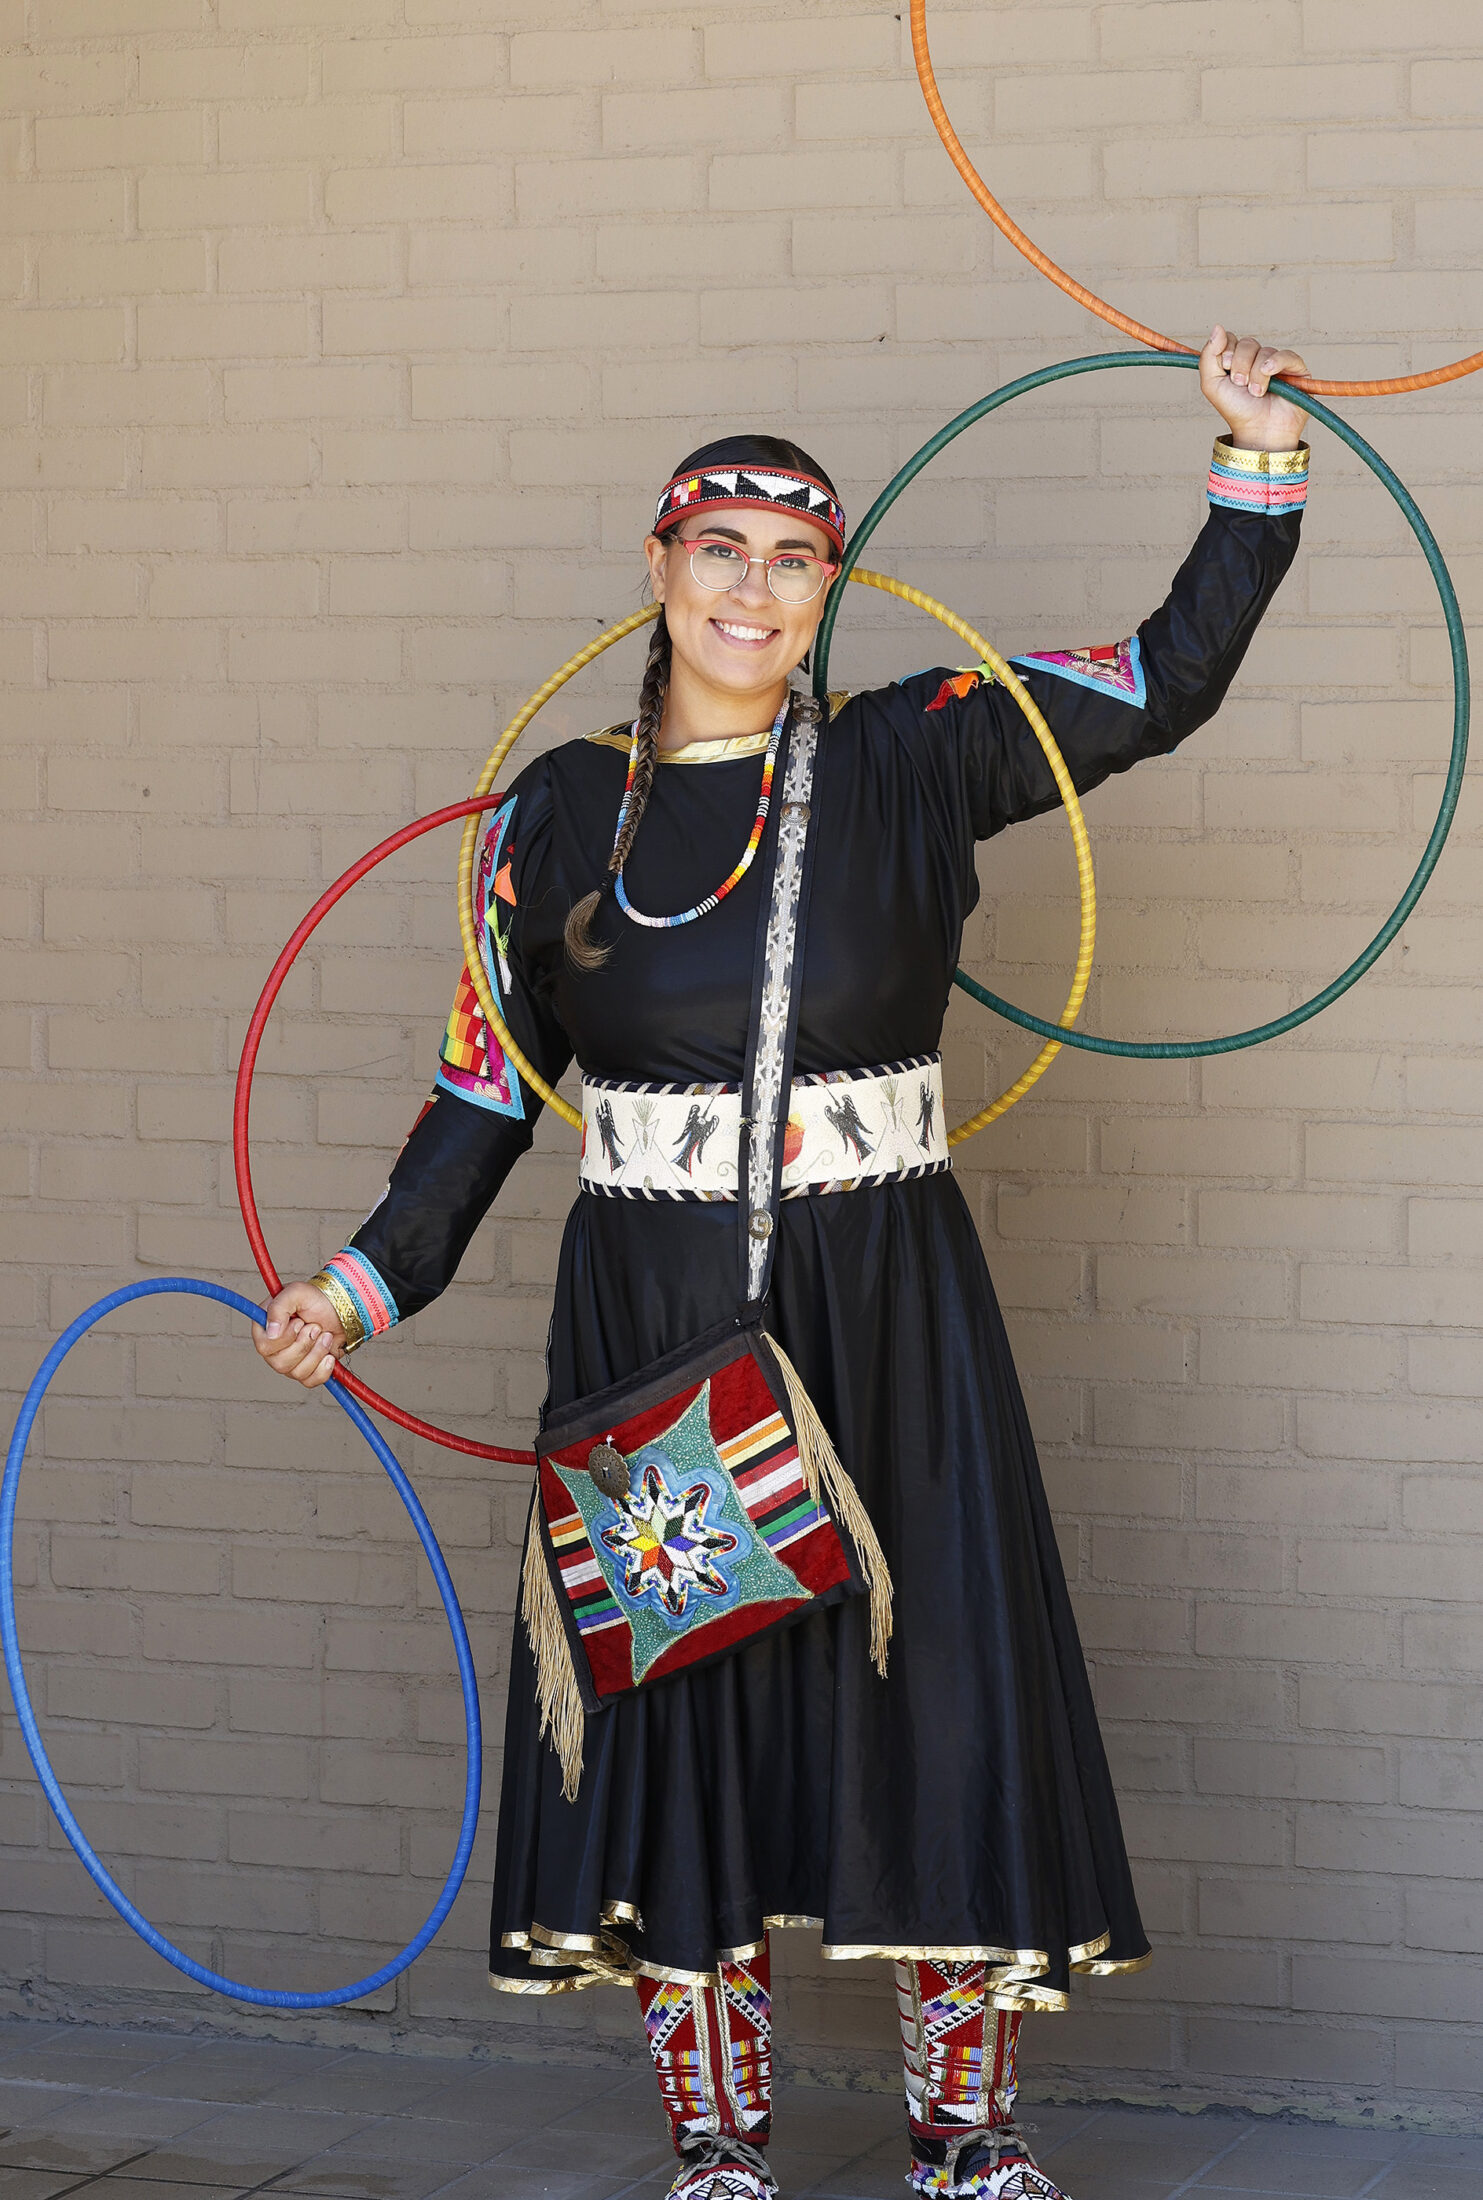 Woman wearing a black dress with beadwork on her dress and moccasins. She is holding four colorful hoops while standing in front of a tan brick wall.